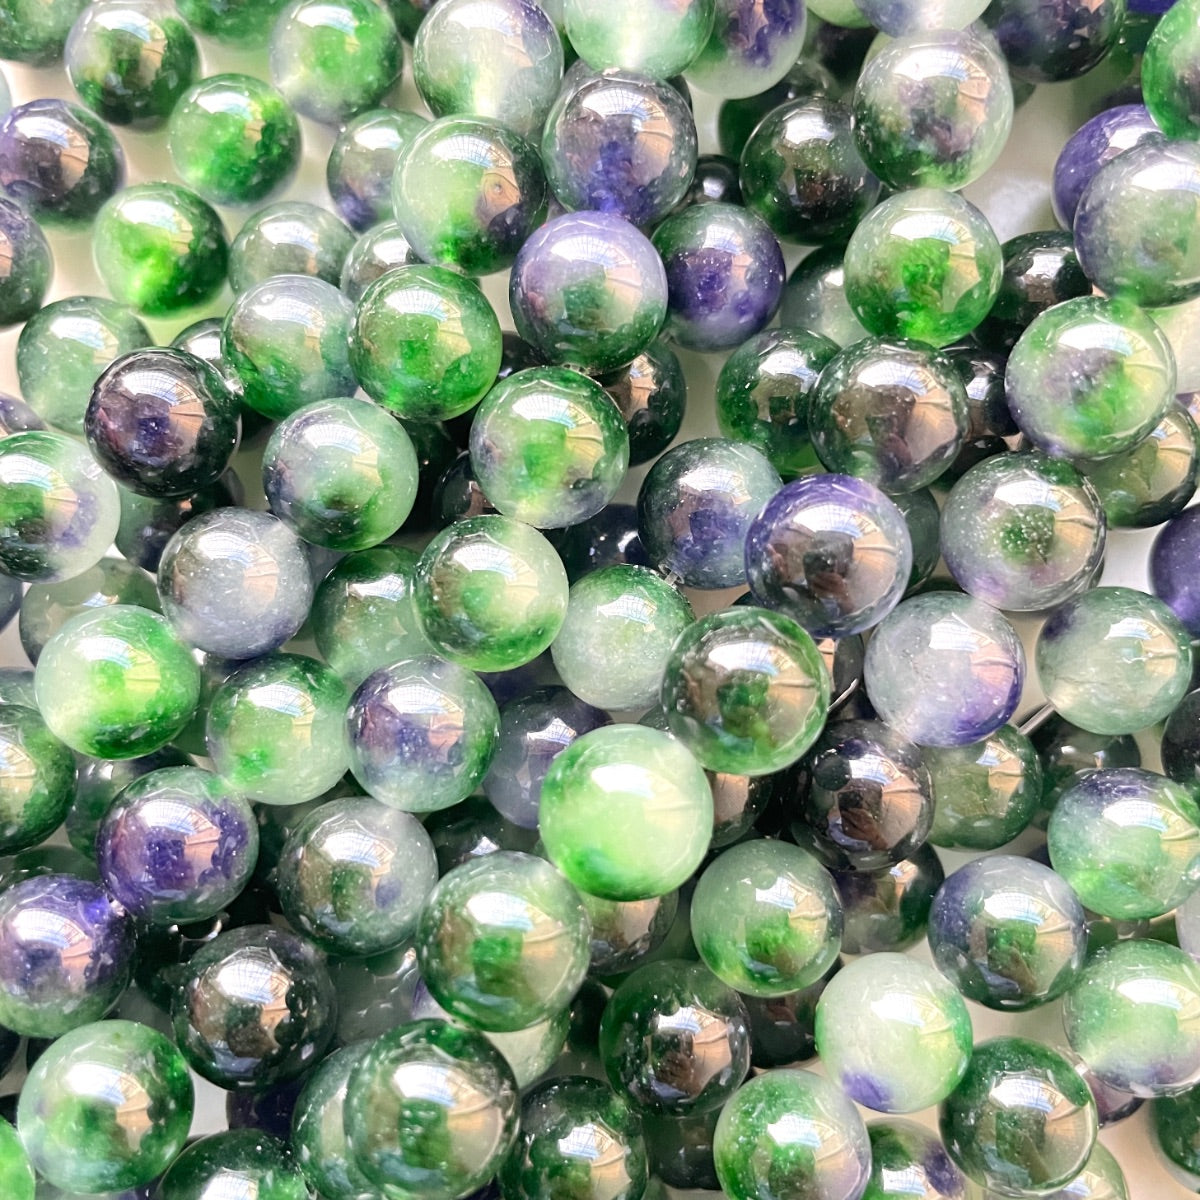 Candy jade beads - Colourful round candy jade beads for jewelry making